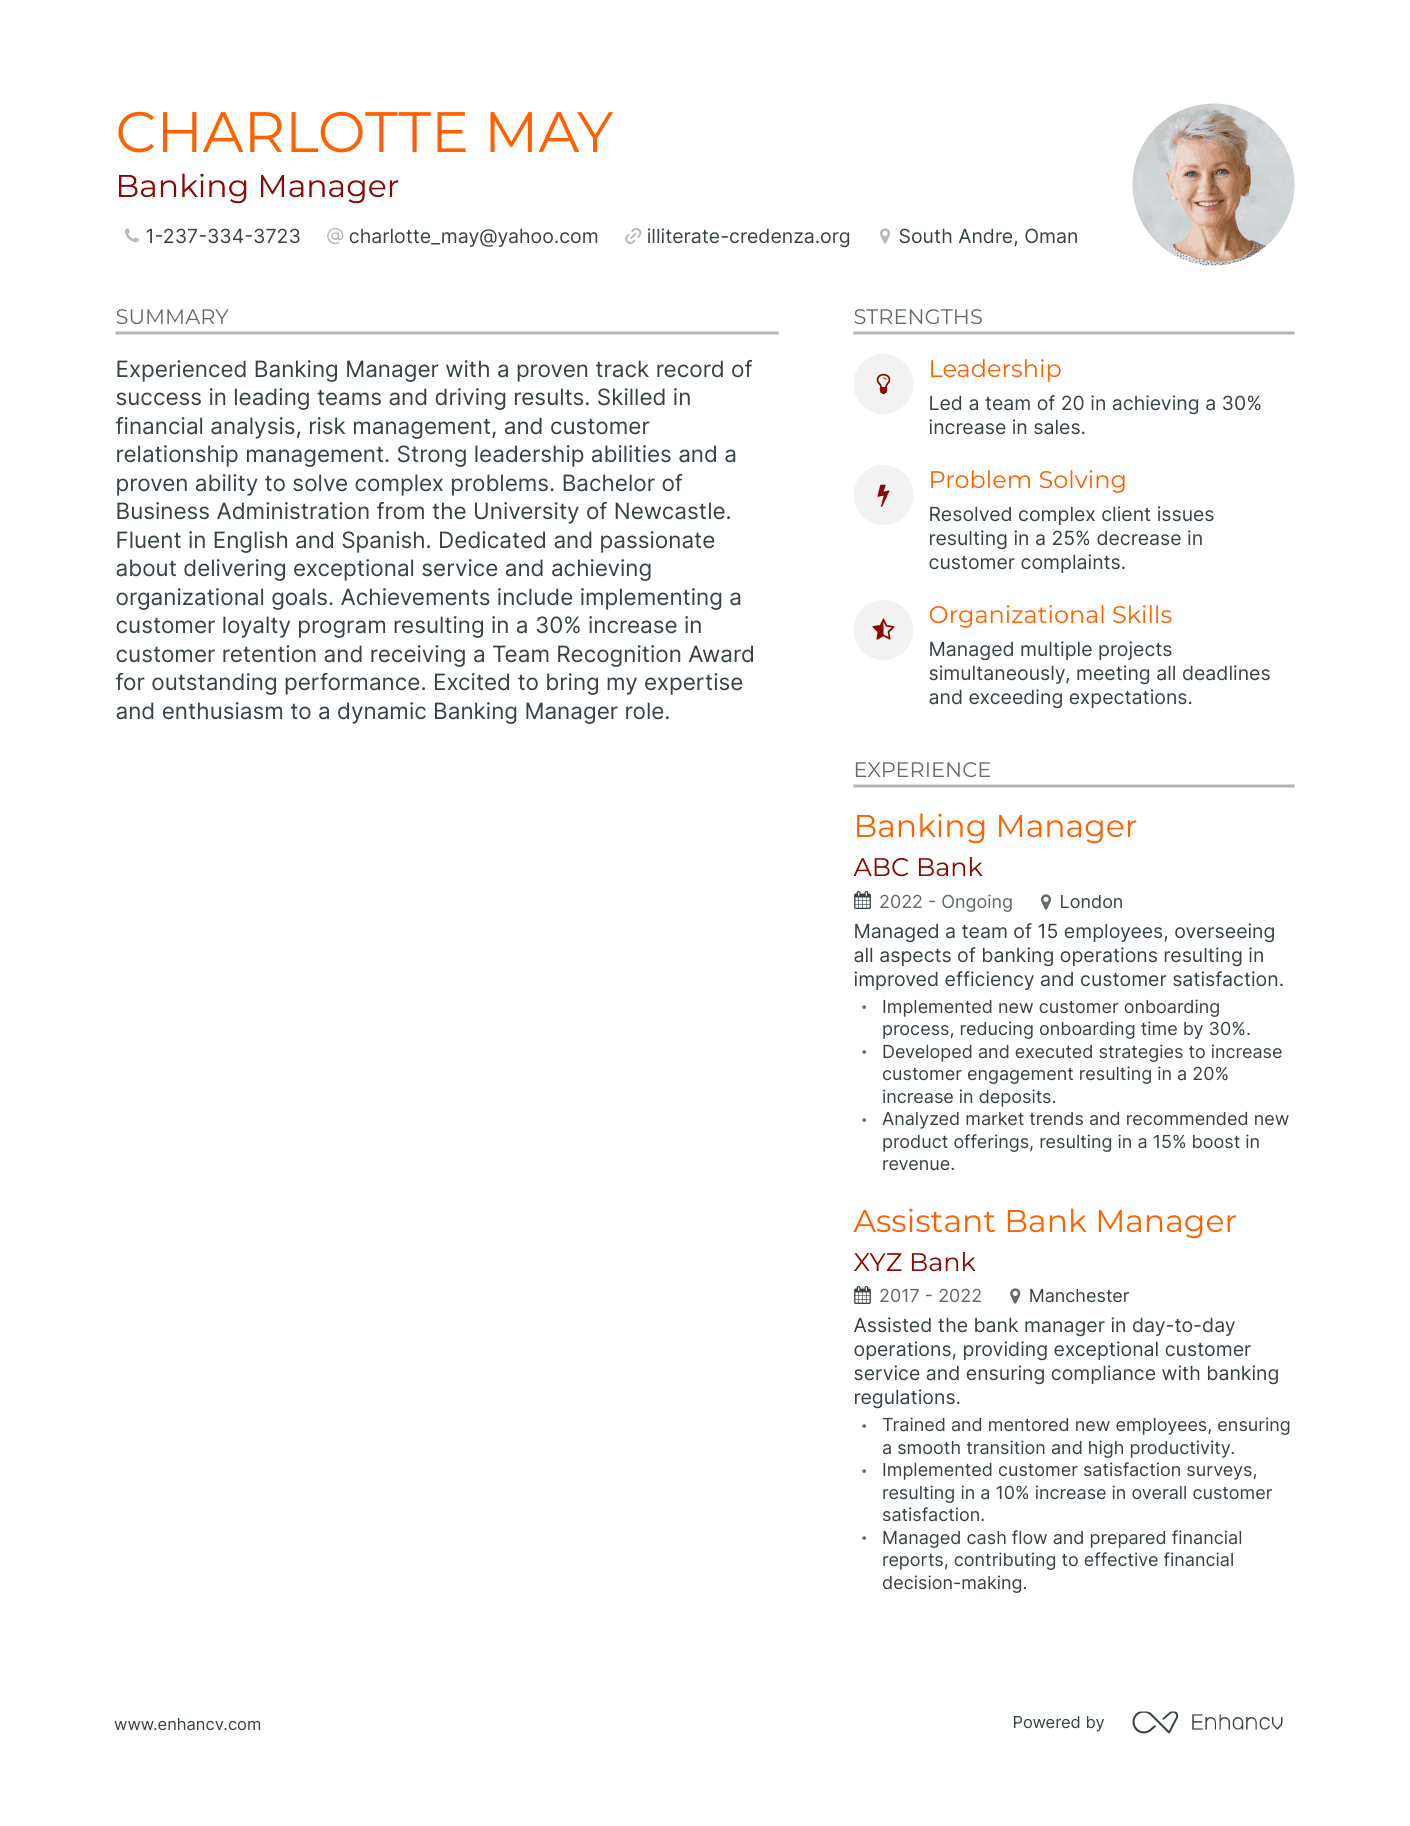 Banking Manager resume example